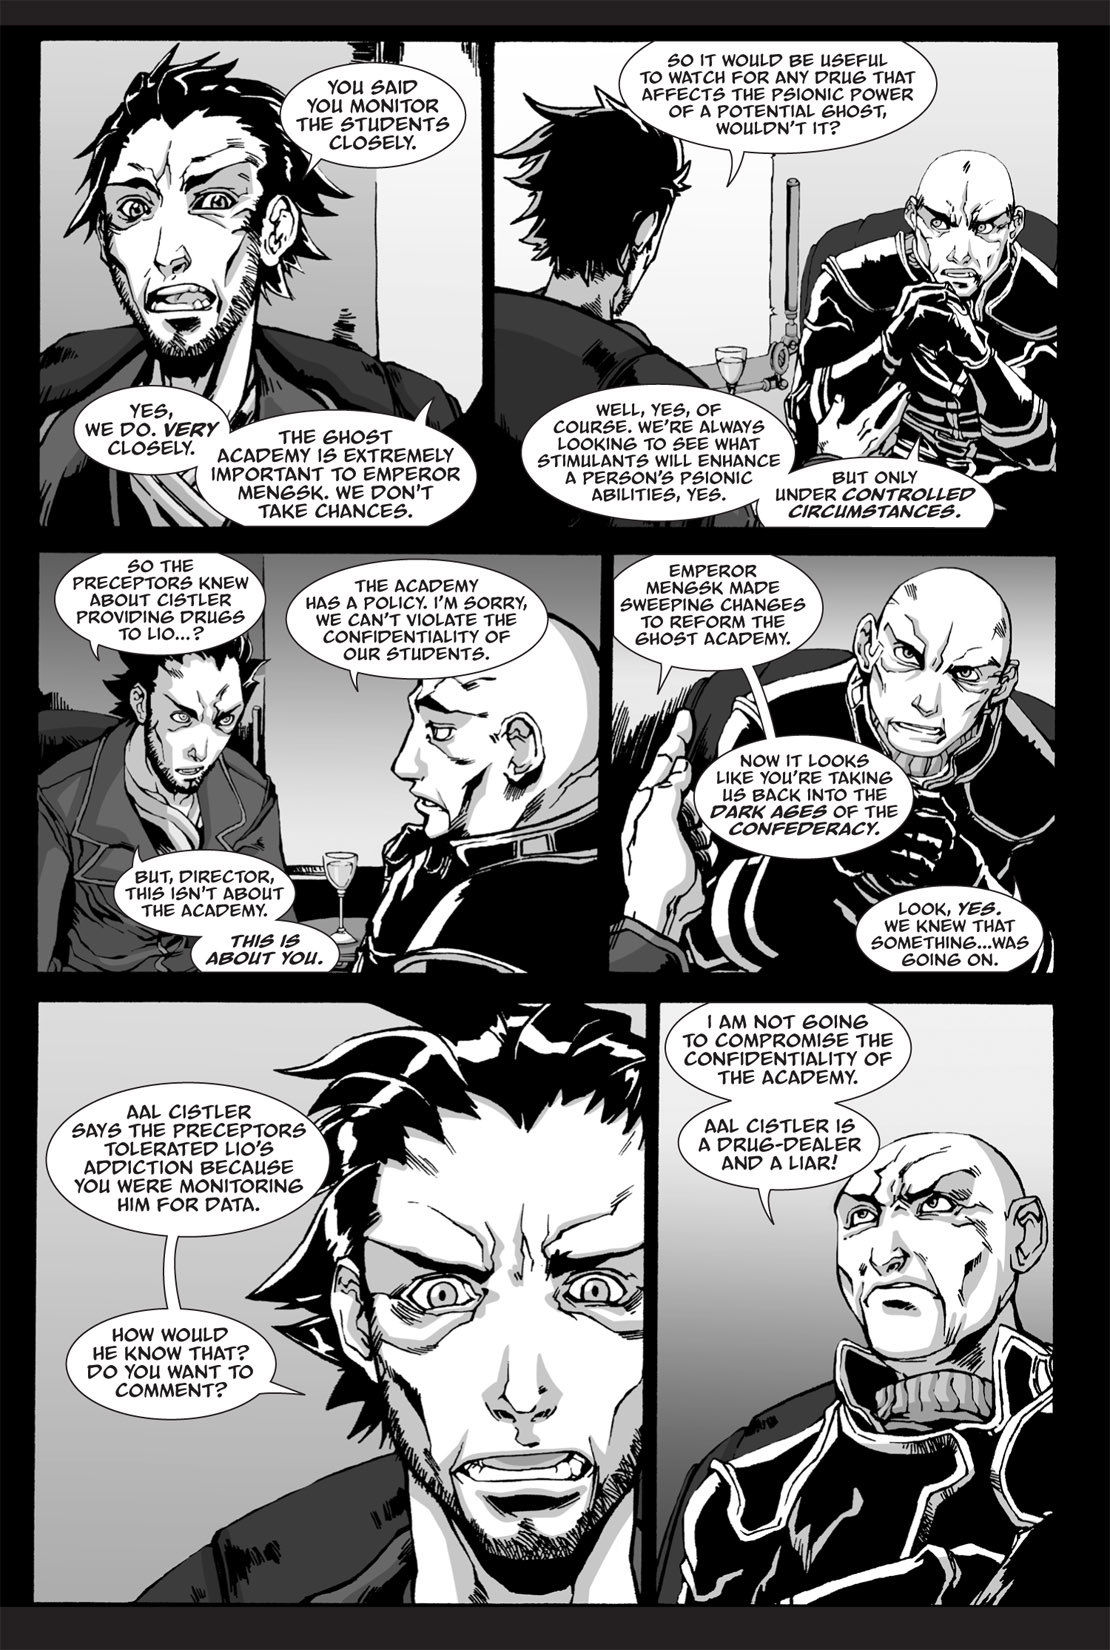 Read online StarCraft: Ghost Academy comic -  Issue # TPB 2 - 11